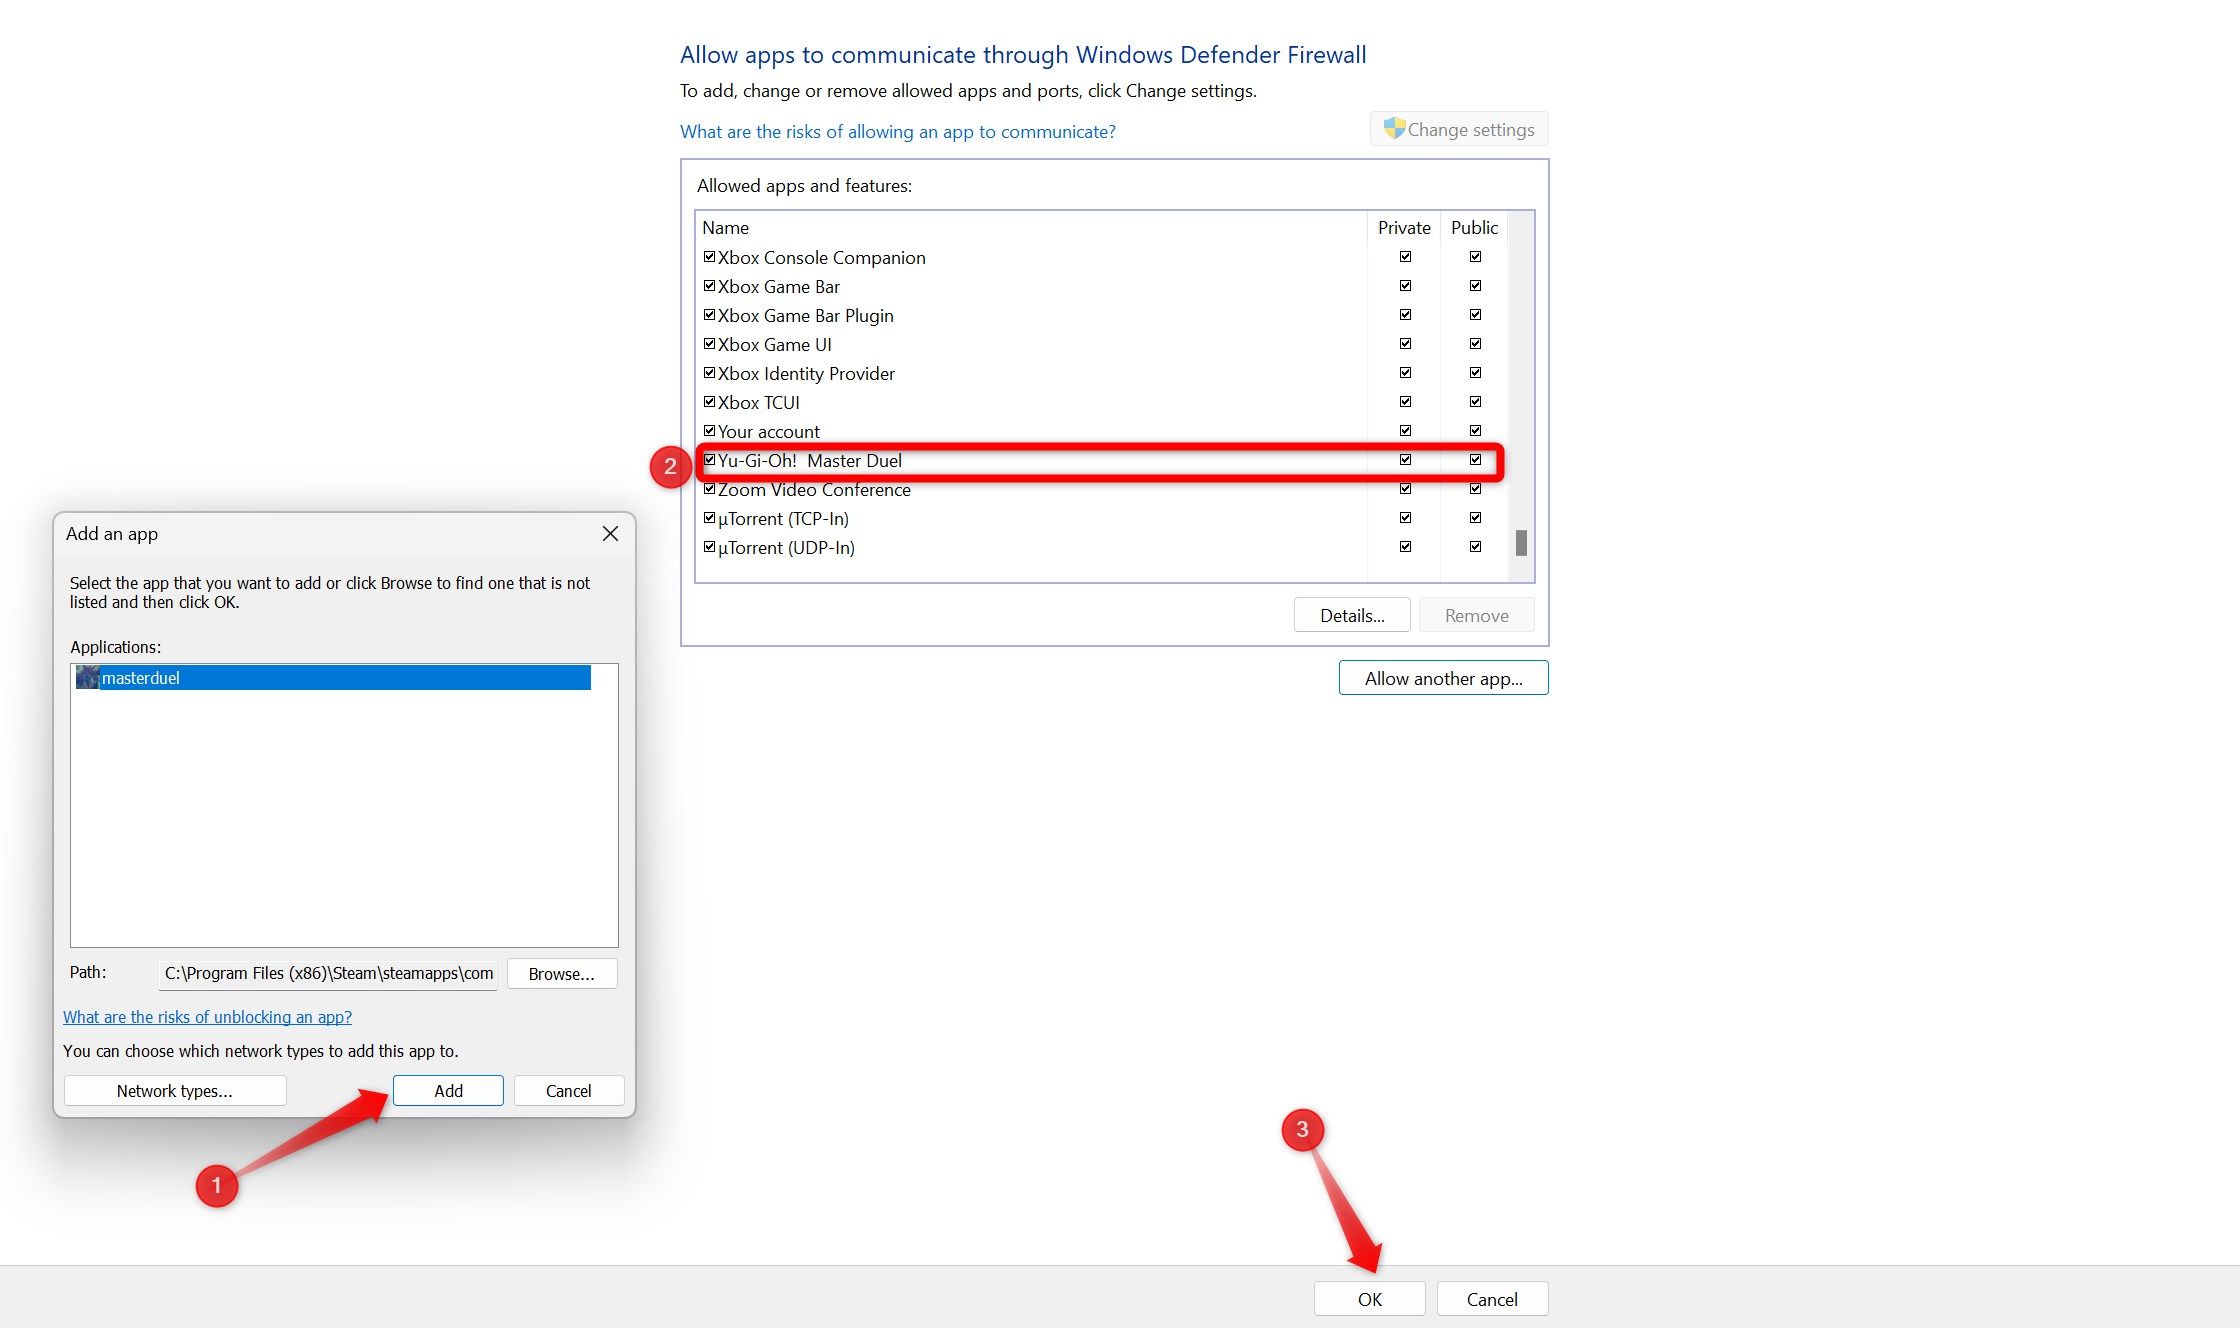 Whitelisting a game file in the Windows Defender Firewall.